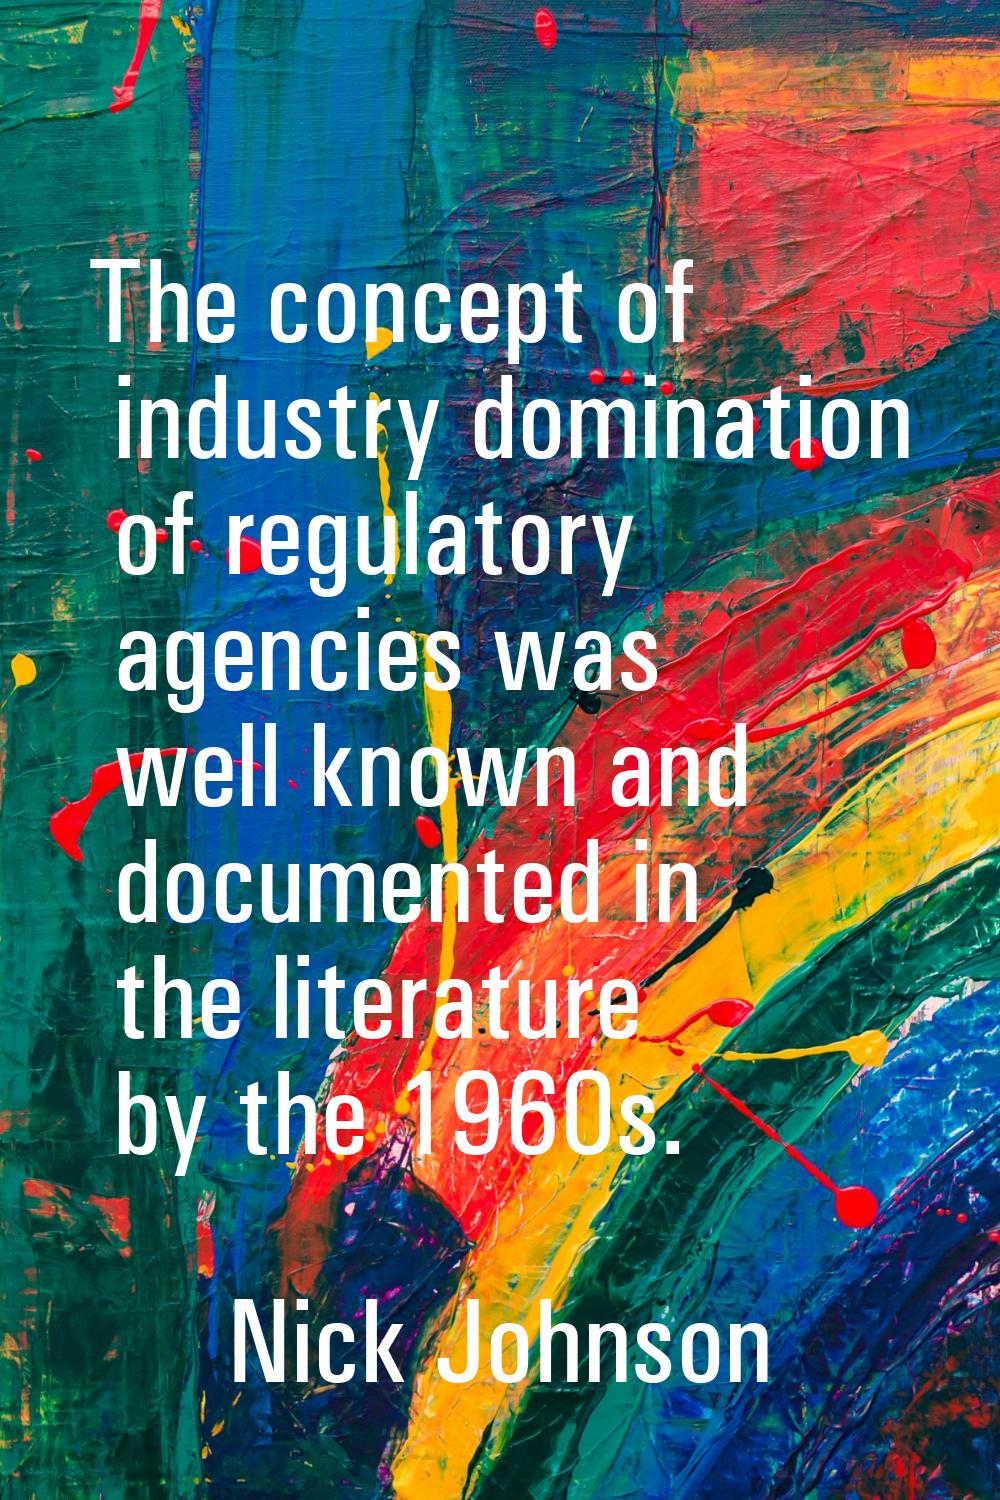 The concept of industry domination of regulatory agencies was well known and documented in the lite